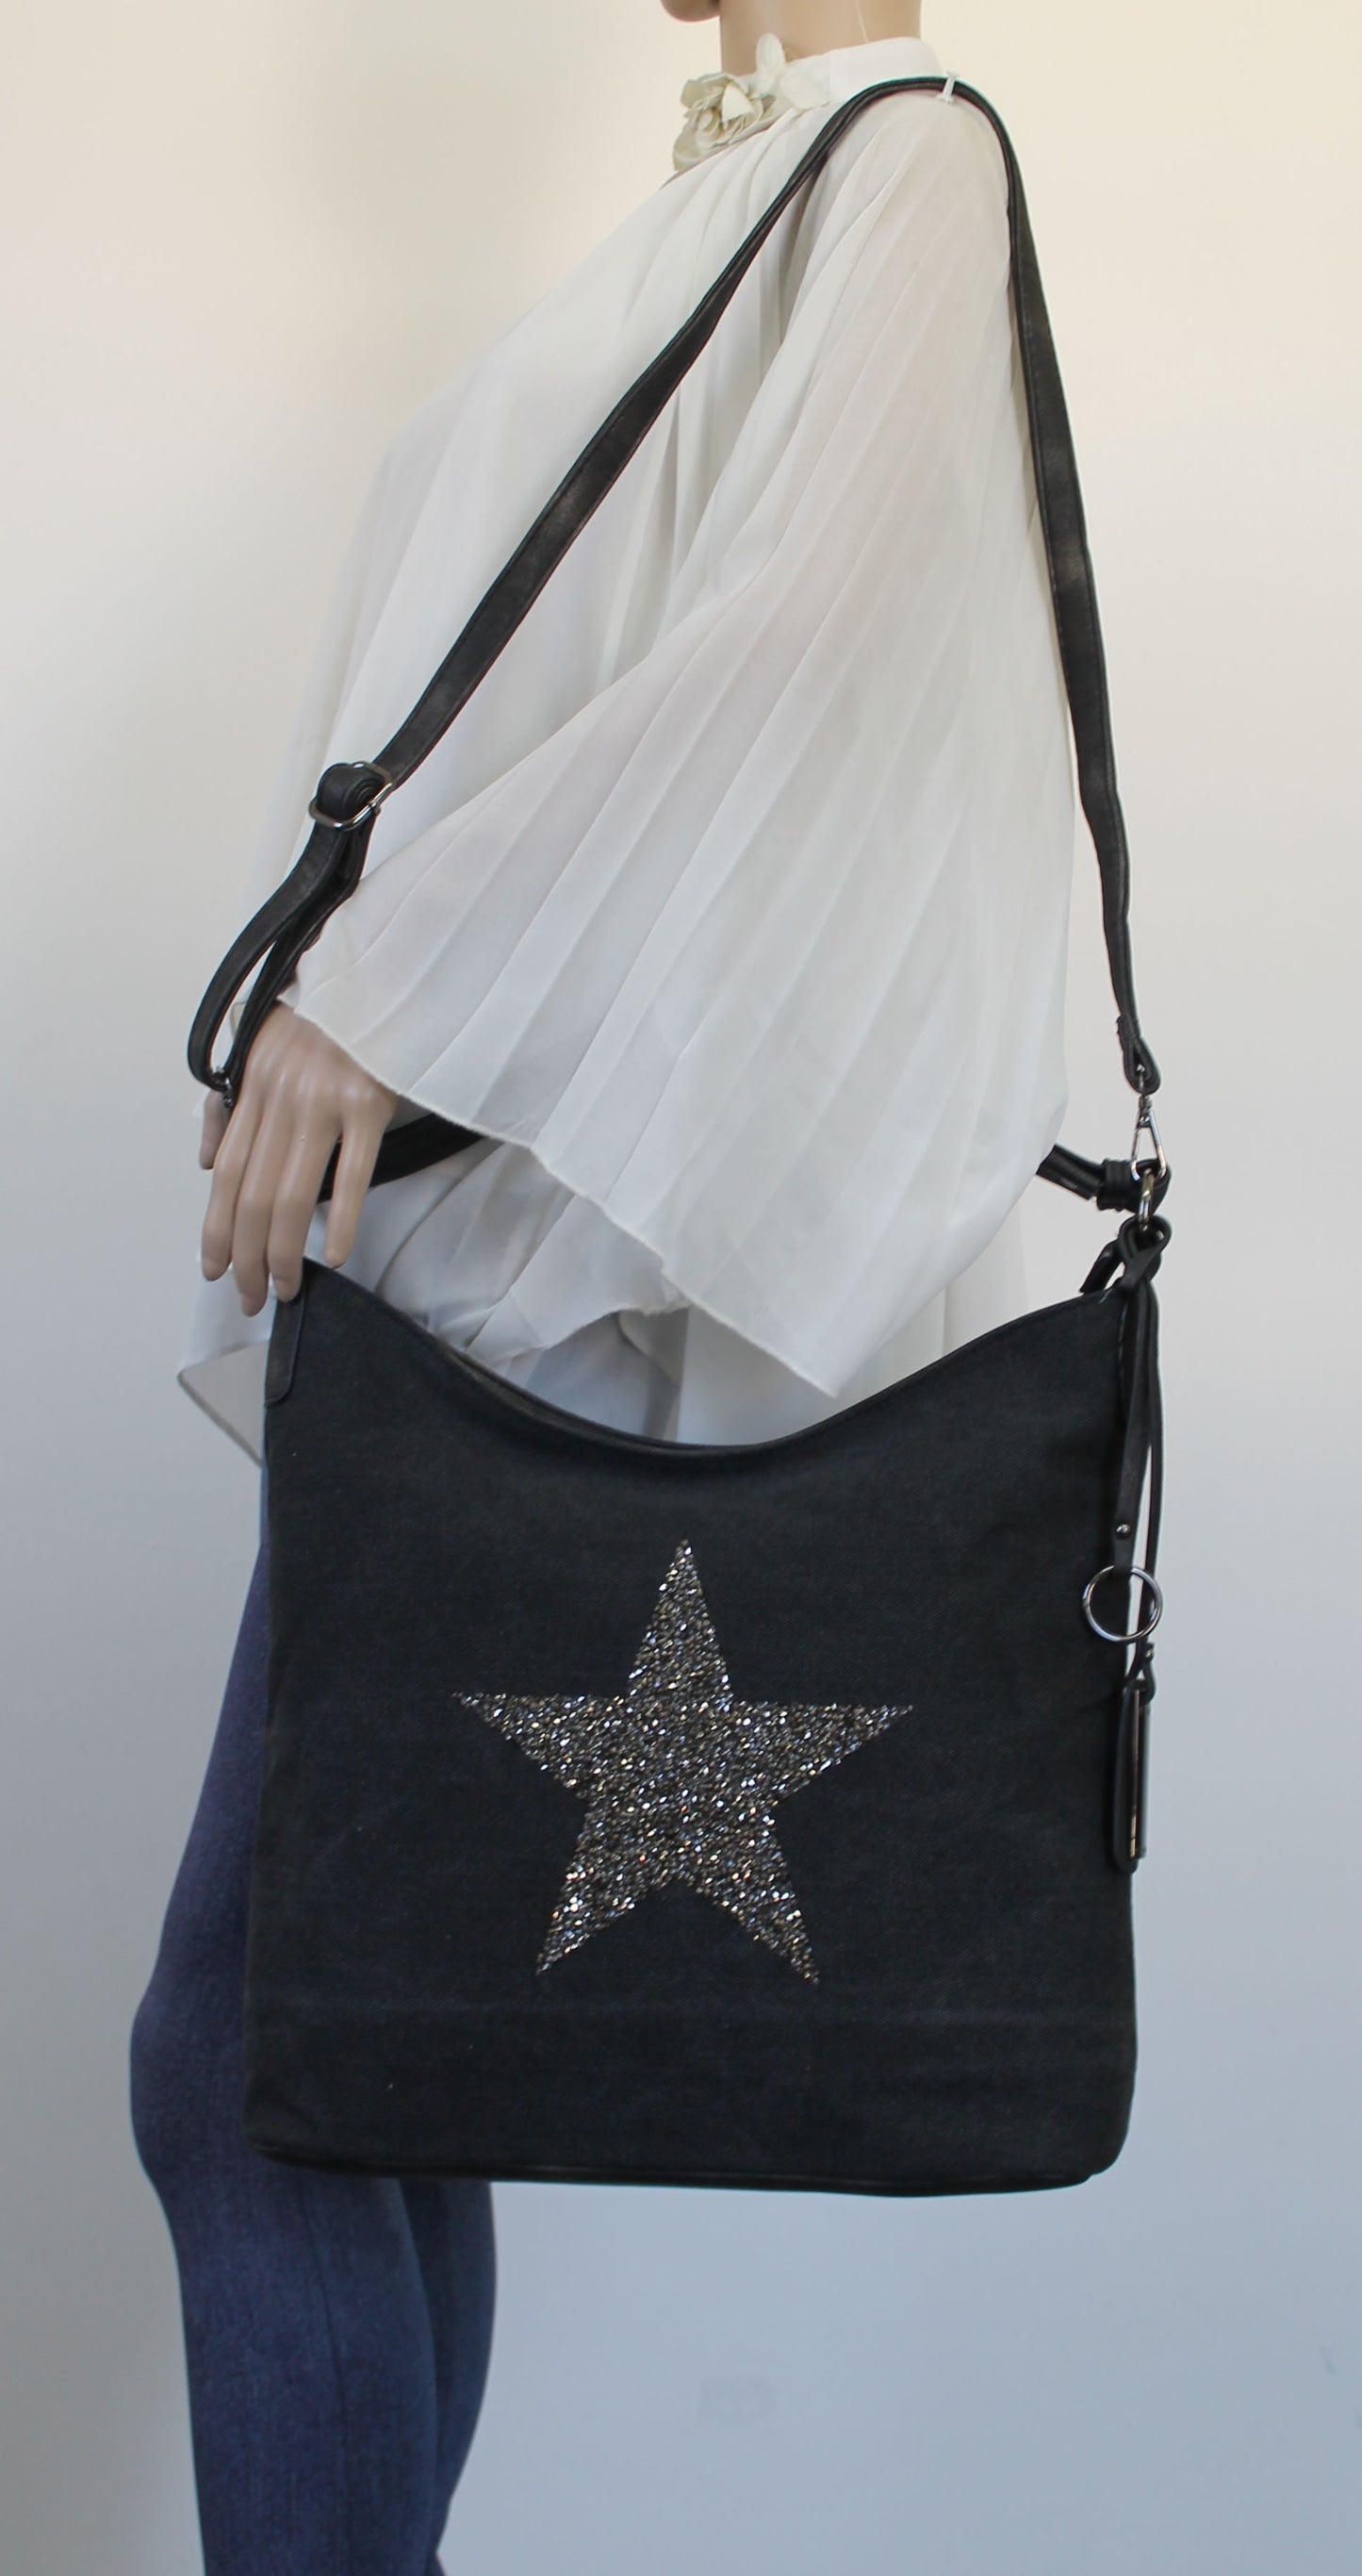 Swanky Swans Millie Handbag BlackPerfect for School, Weddings, Day out!